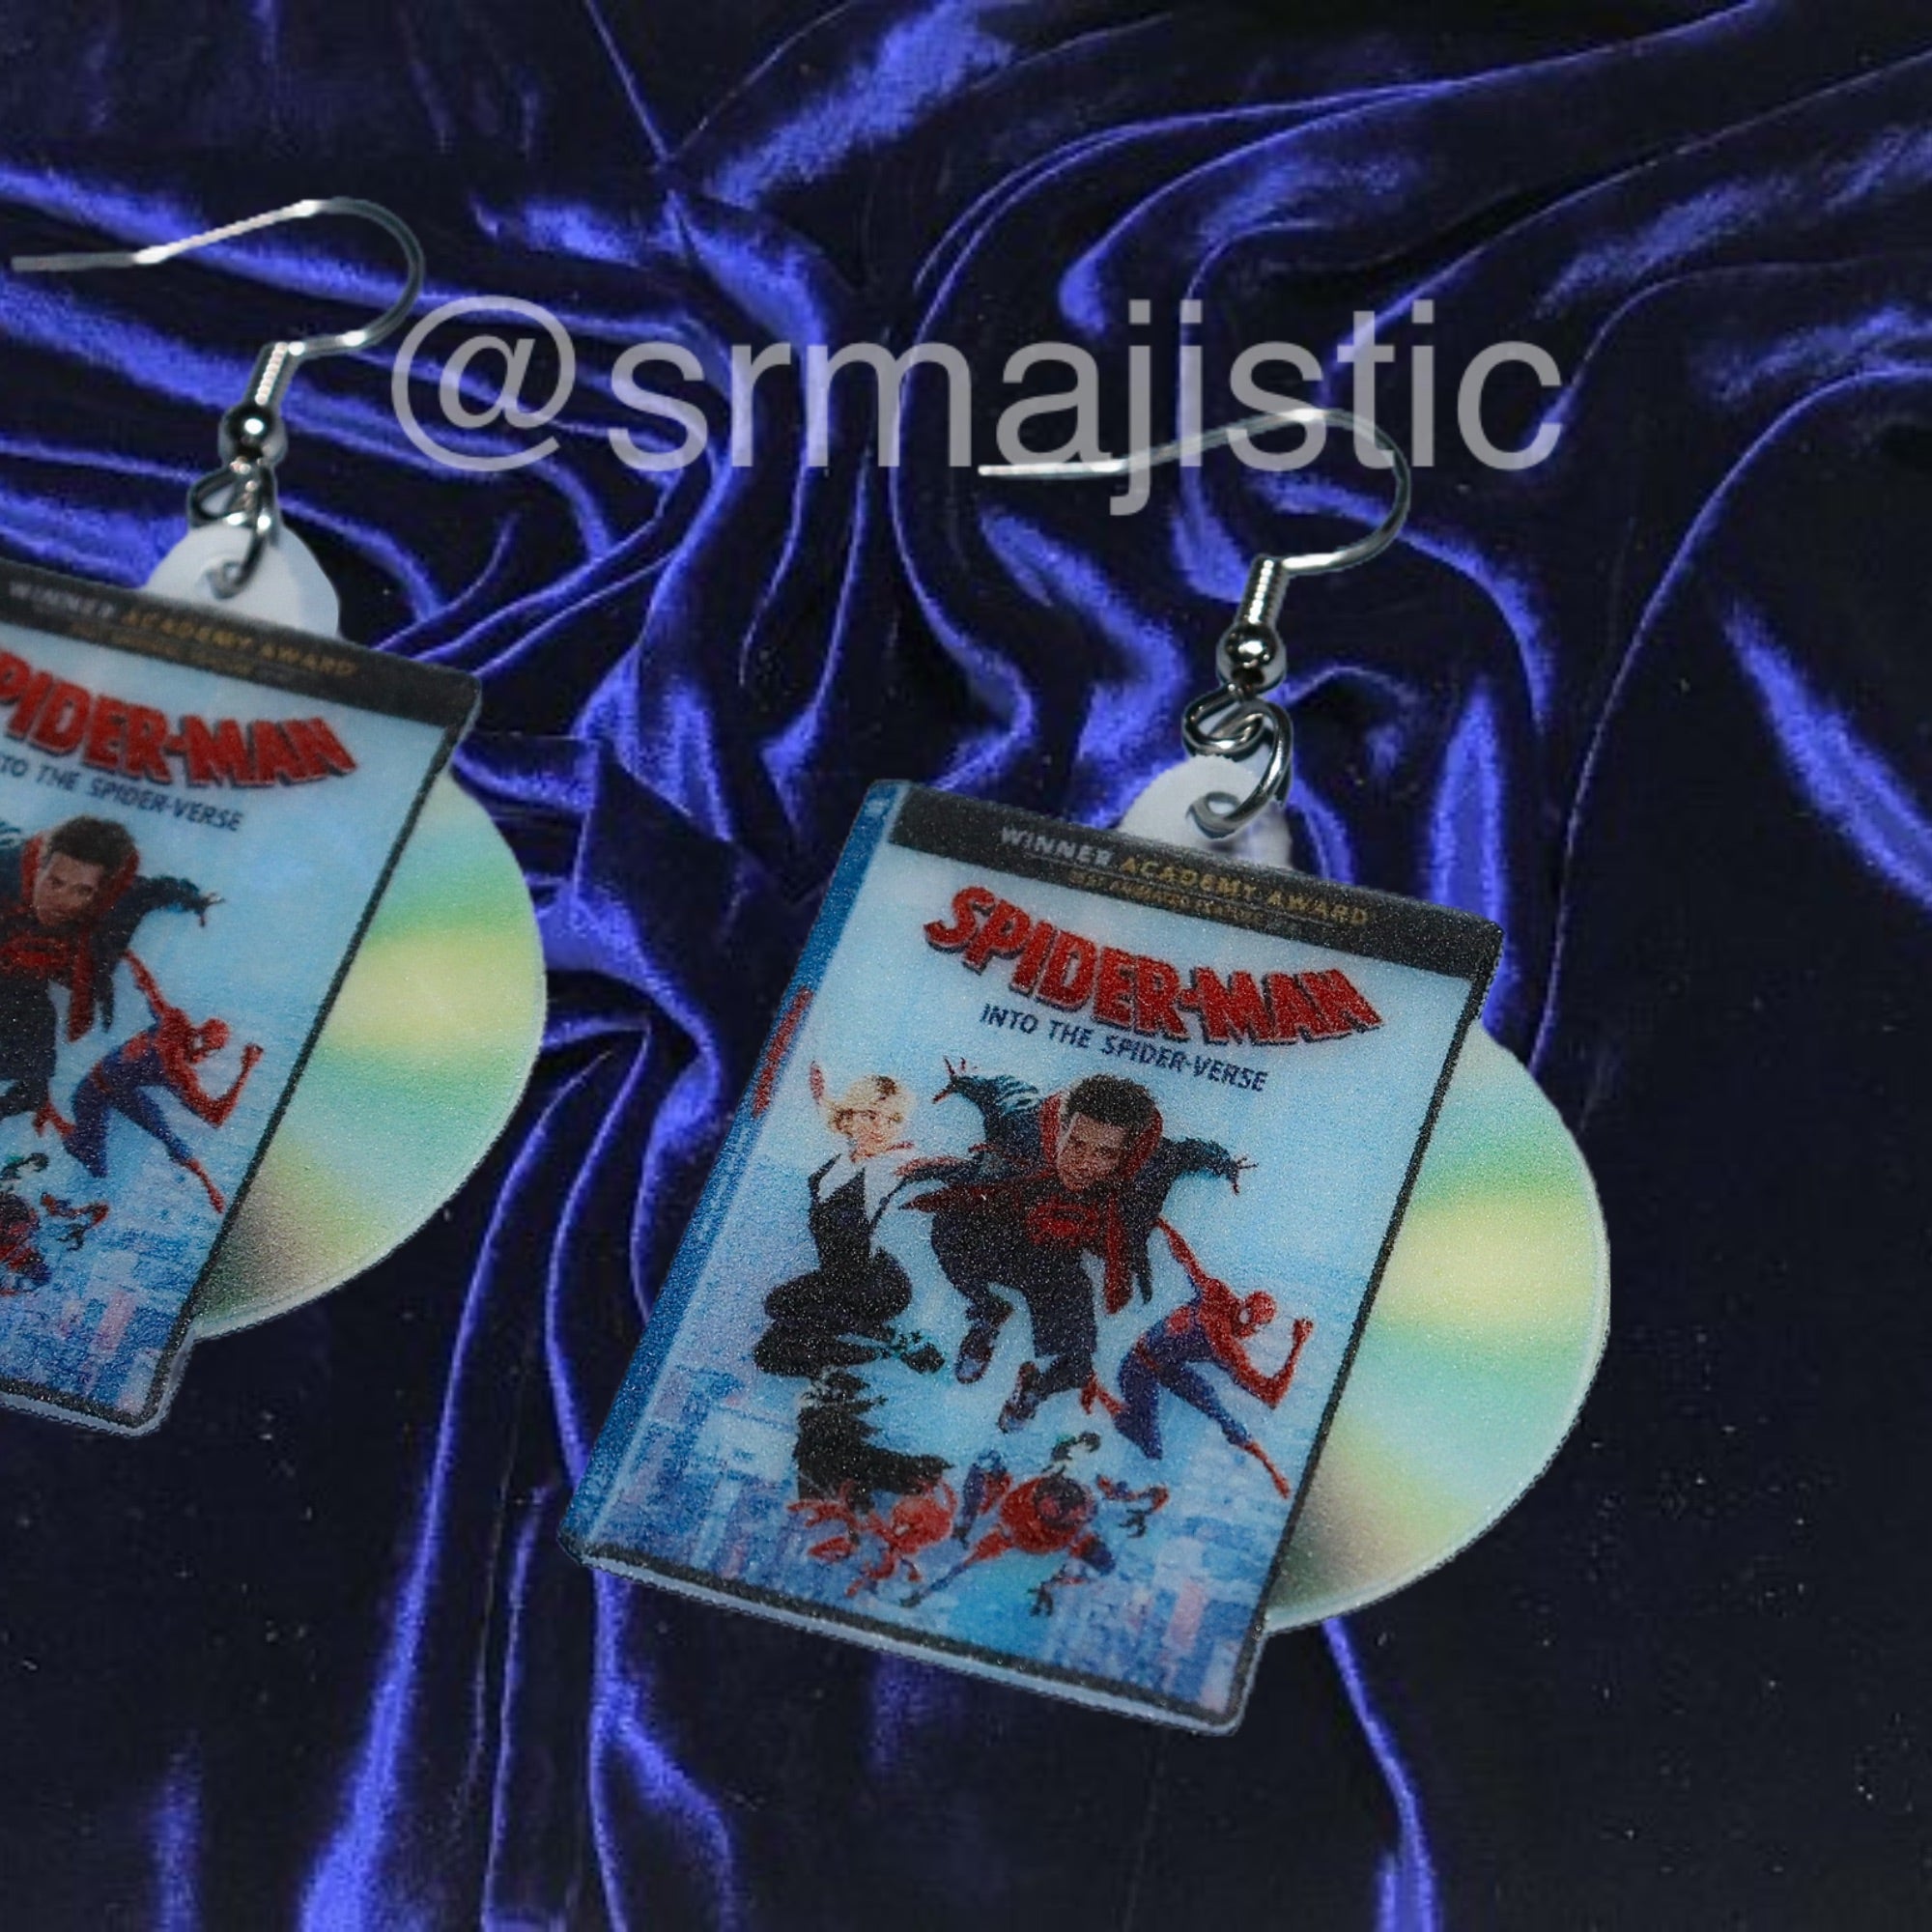 Spider-Man: Into the Spiderverse (2018) DVD 2D detailed Handmade Earrings!